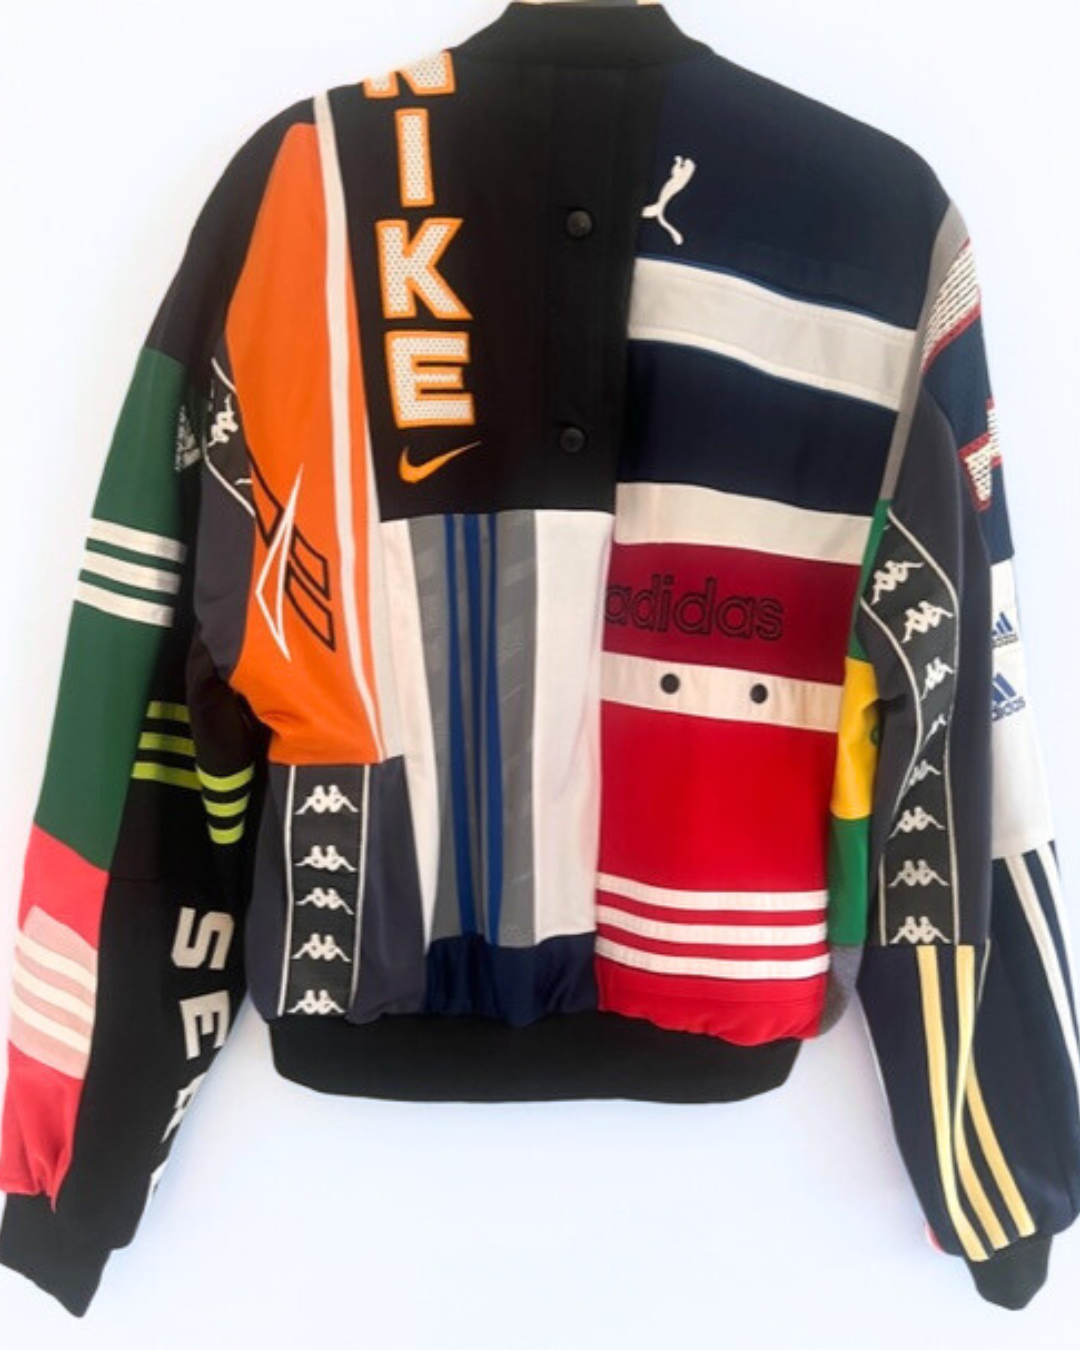 ONE OFF BOMBER Jacket made from Vintage sportswear panelling